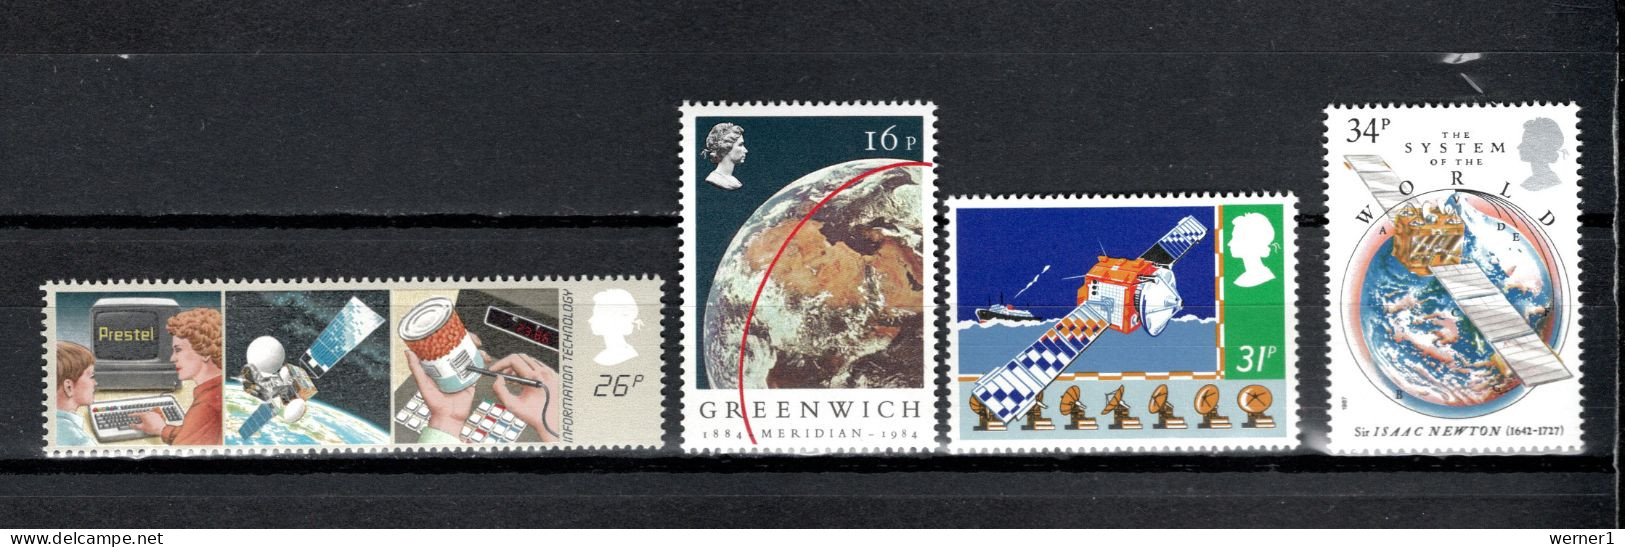 UK England, Great Britain 1982/1987 Space, Satellites, Greenwich 4 Stamps MNH - Europa